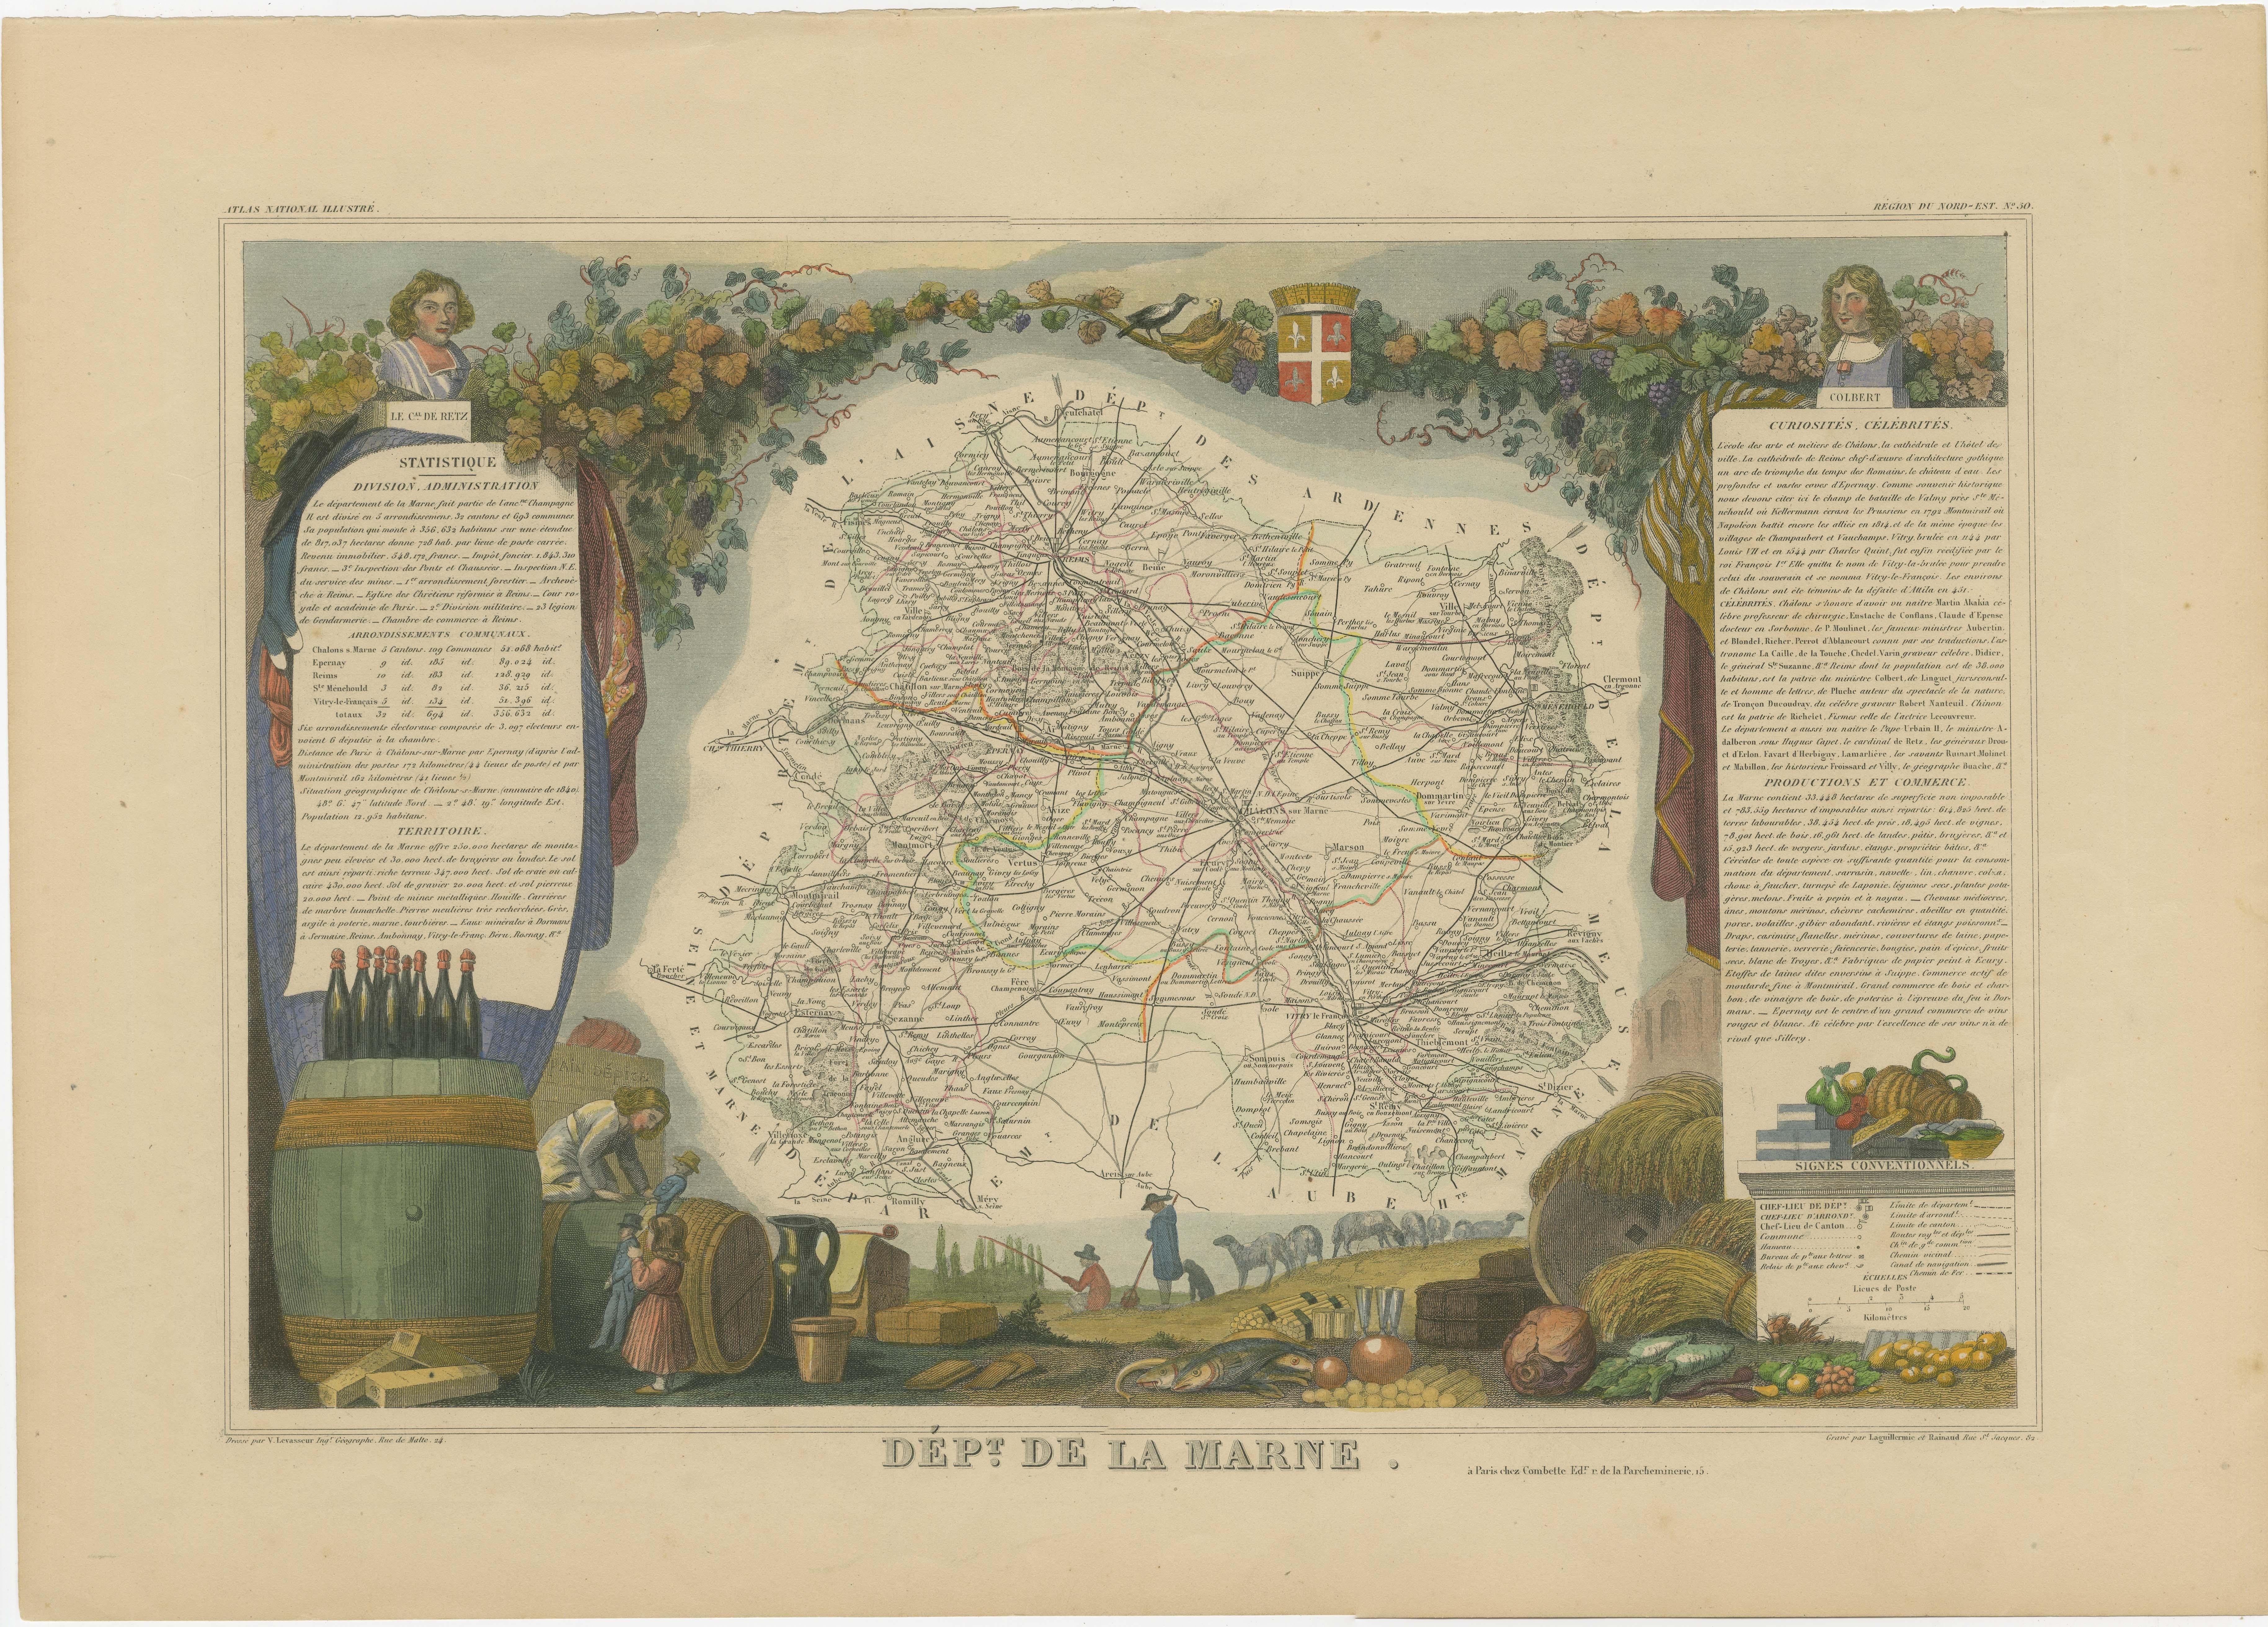 Antique map titled 'Dépt. de la Marne'. Map of the French department of Marne, France. This department is home to the Champagne region where the world's finest sparkling wine is produced. The map is surrounded by elaborate decorative engravings